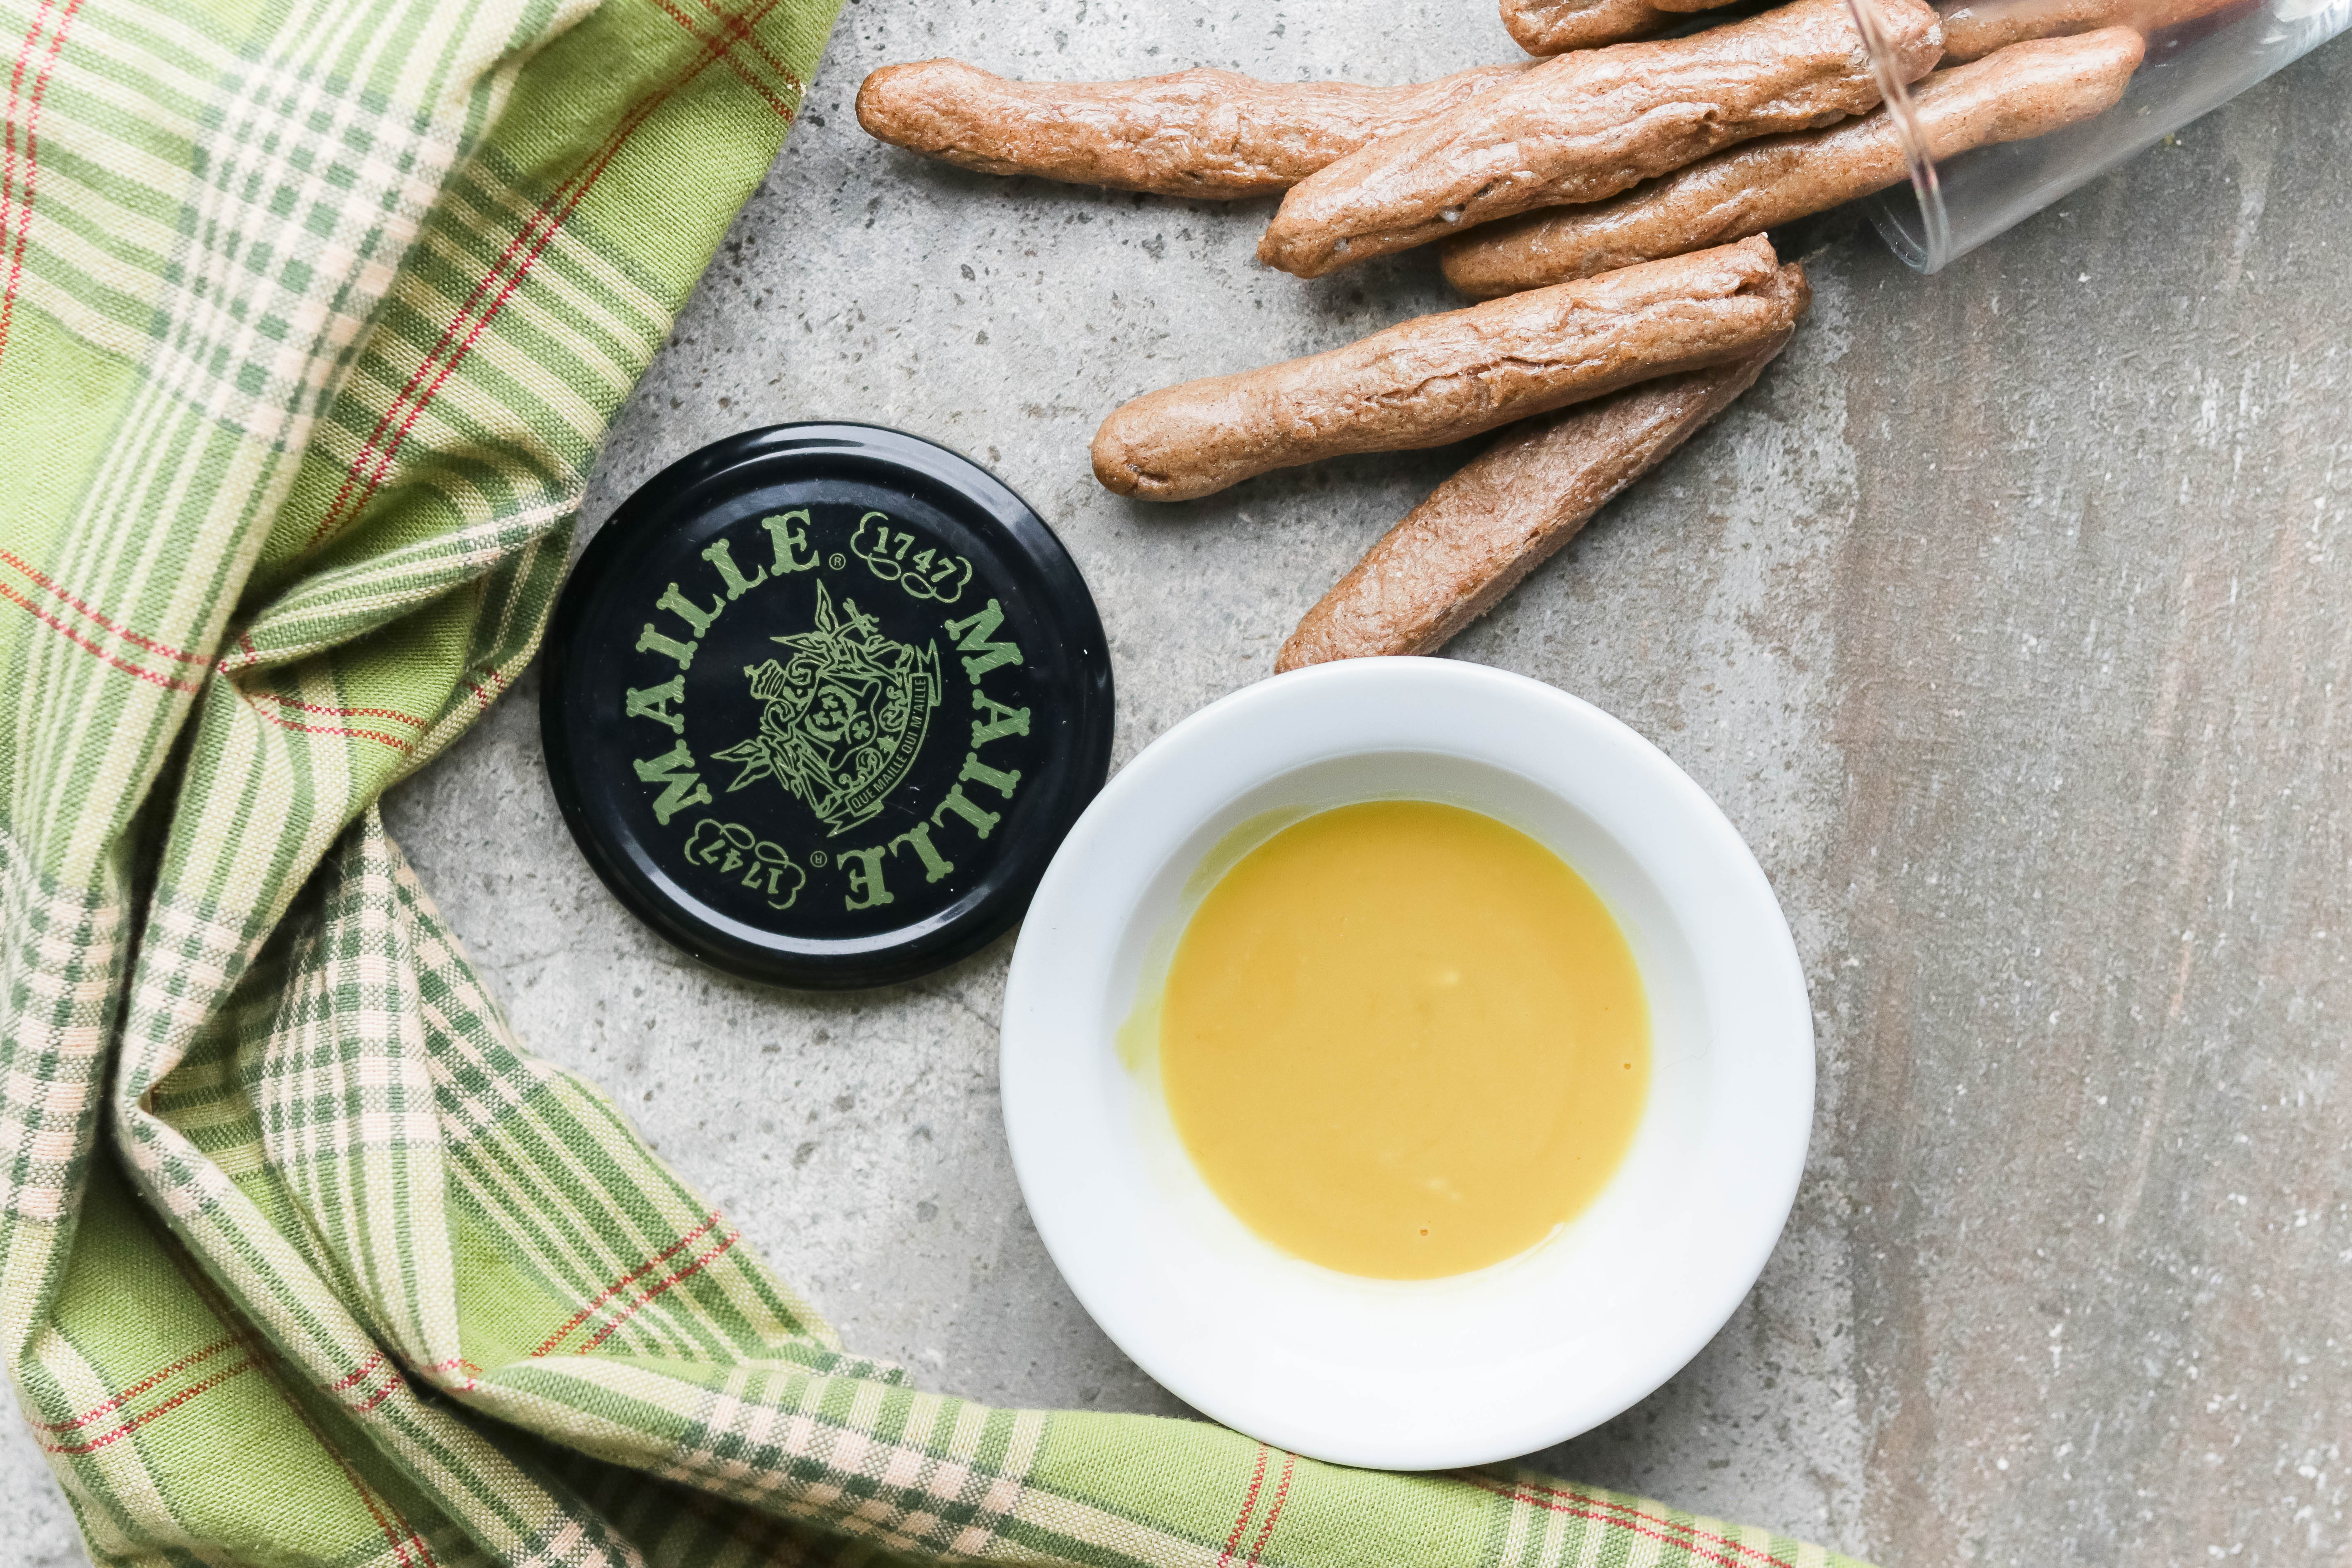 Gluten Free and Vegan Pretzel Sticks with Maple Mustard Dip; delicious appetizer idea for the holiday season. Easy finger food everyone will love! #glutenfreepretzels #maillemustard #dijonmustard #veganpretzels